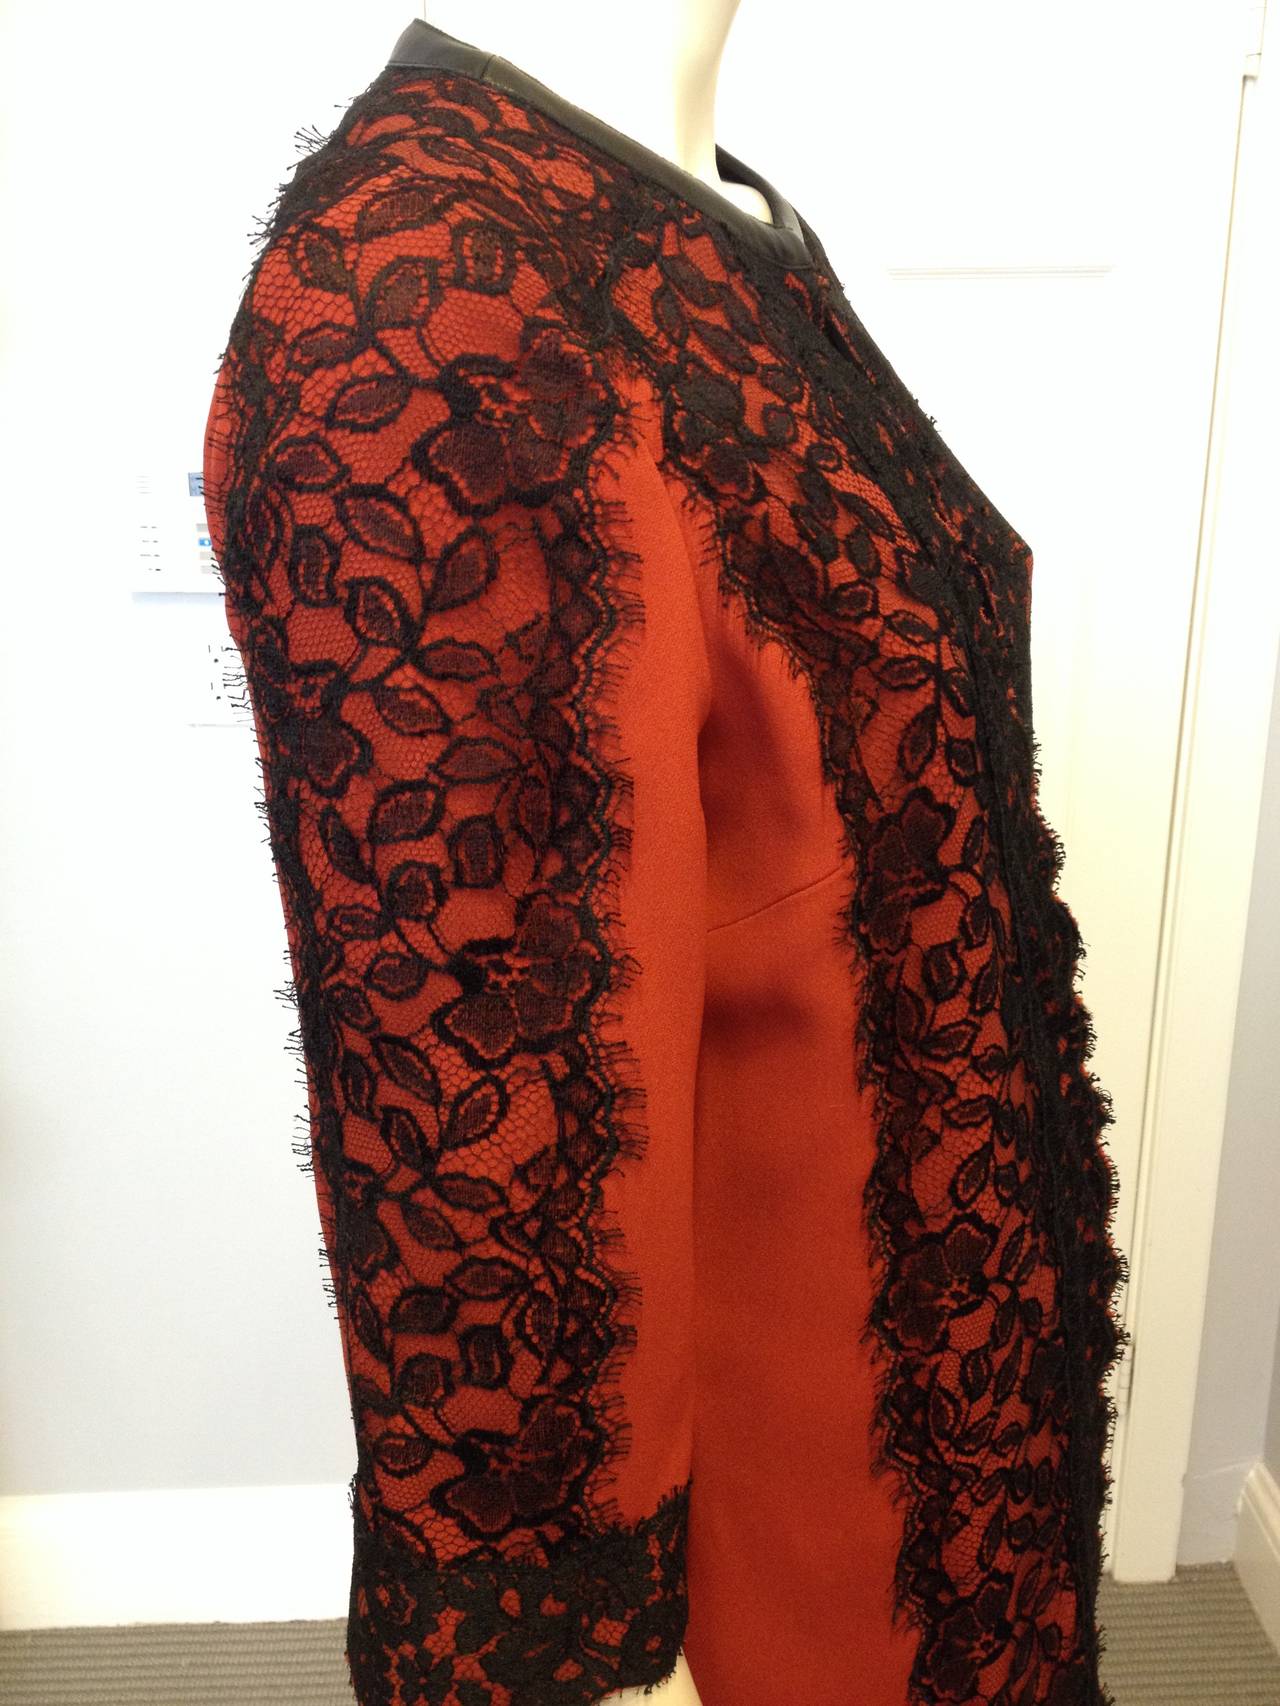 Women's Andrew Gn Rust Red Coat with Black Lace Overlay